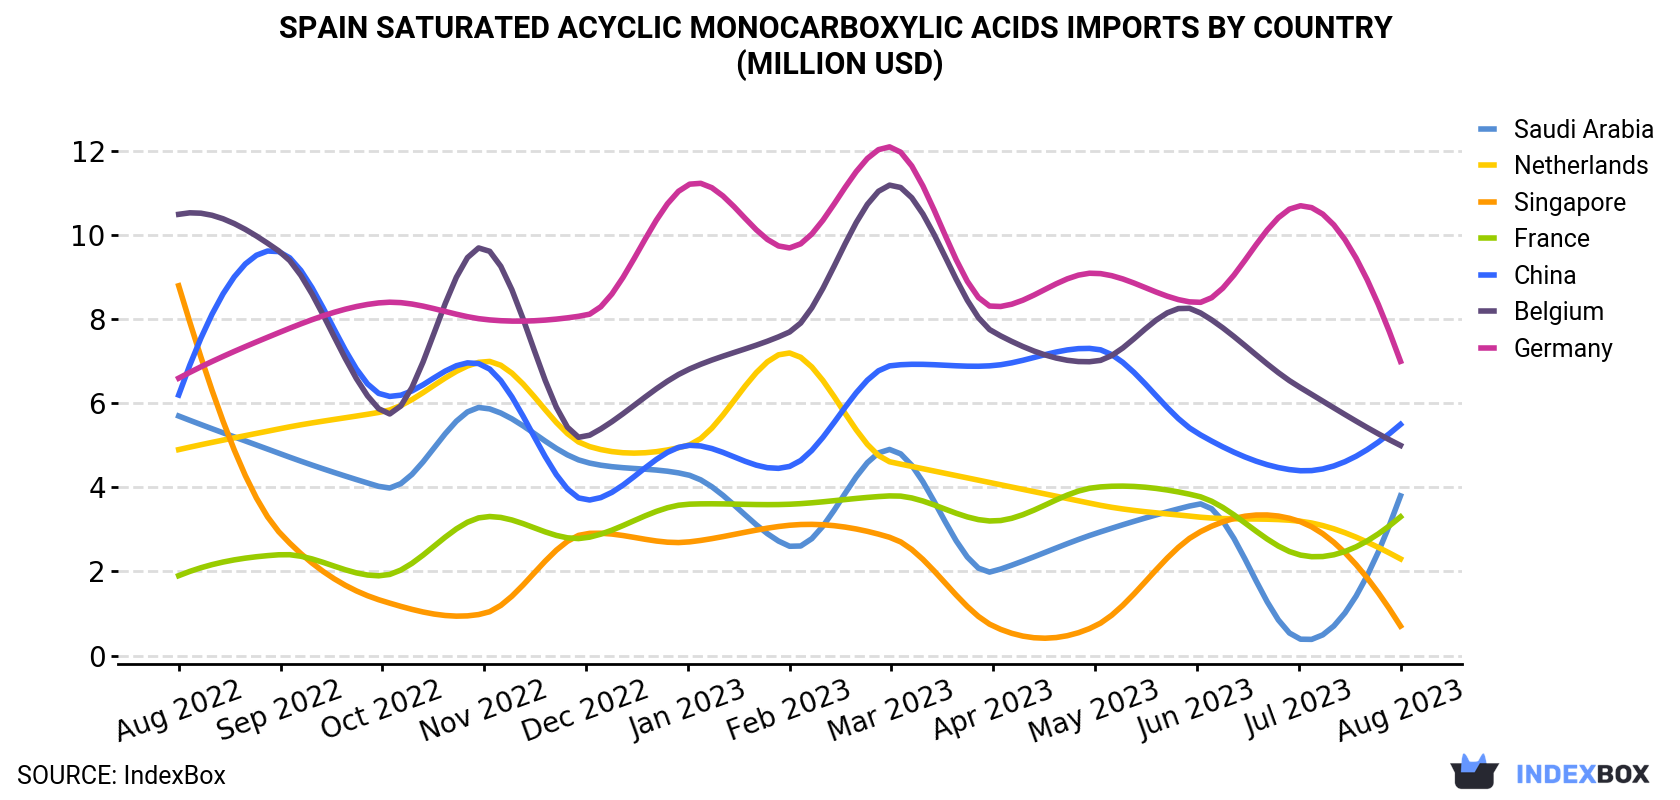 Spain Saturated Acyclic Monocarboxylic Acids Imports By Country (Million USD)